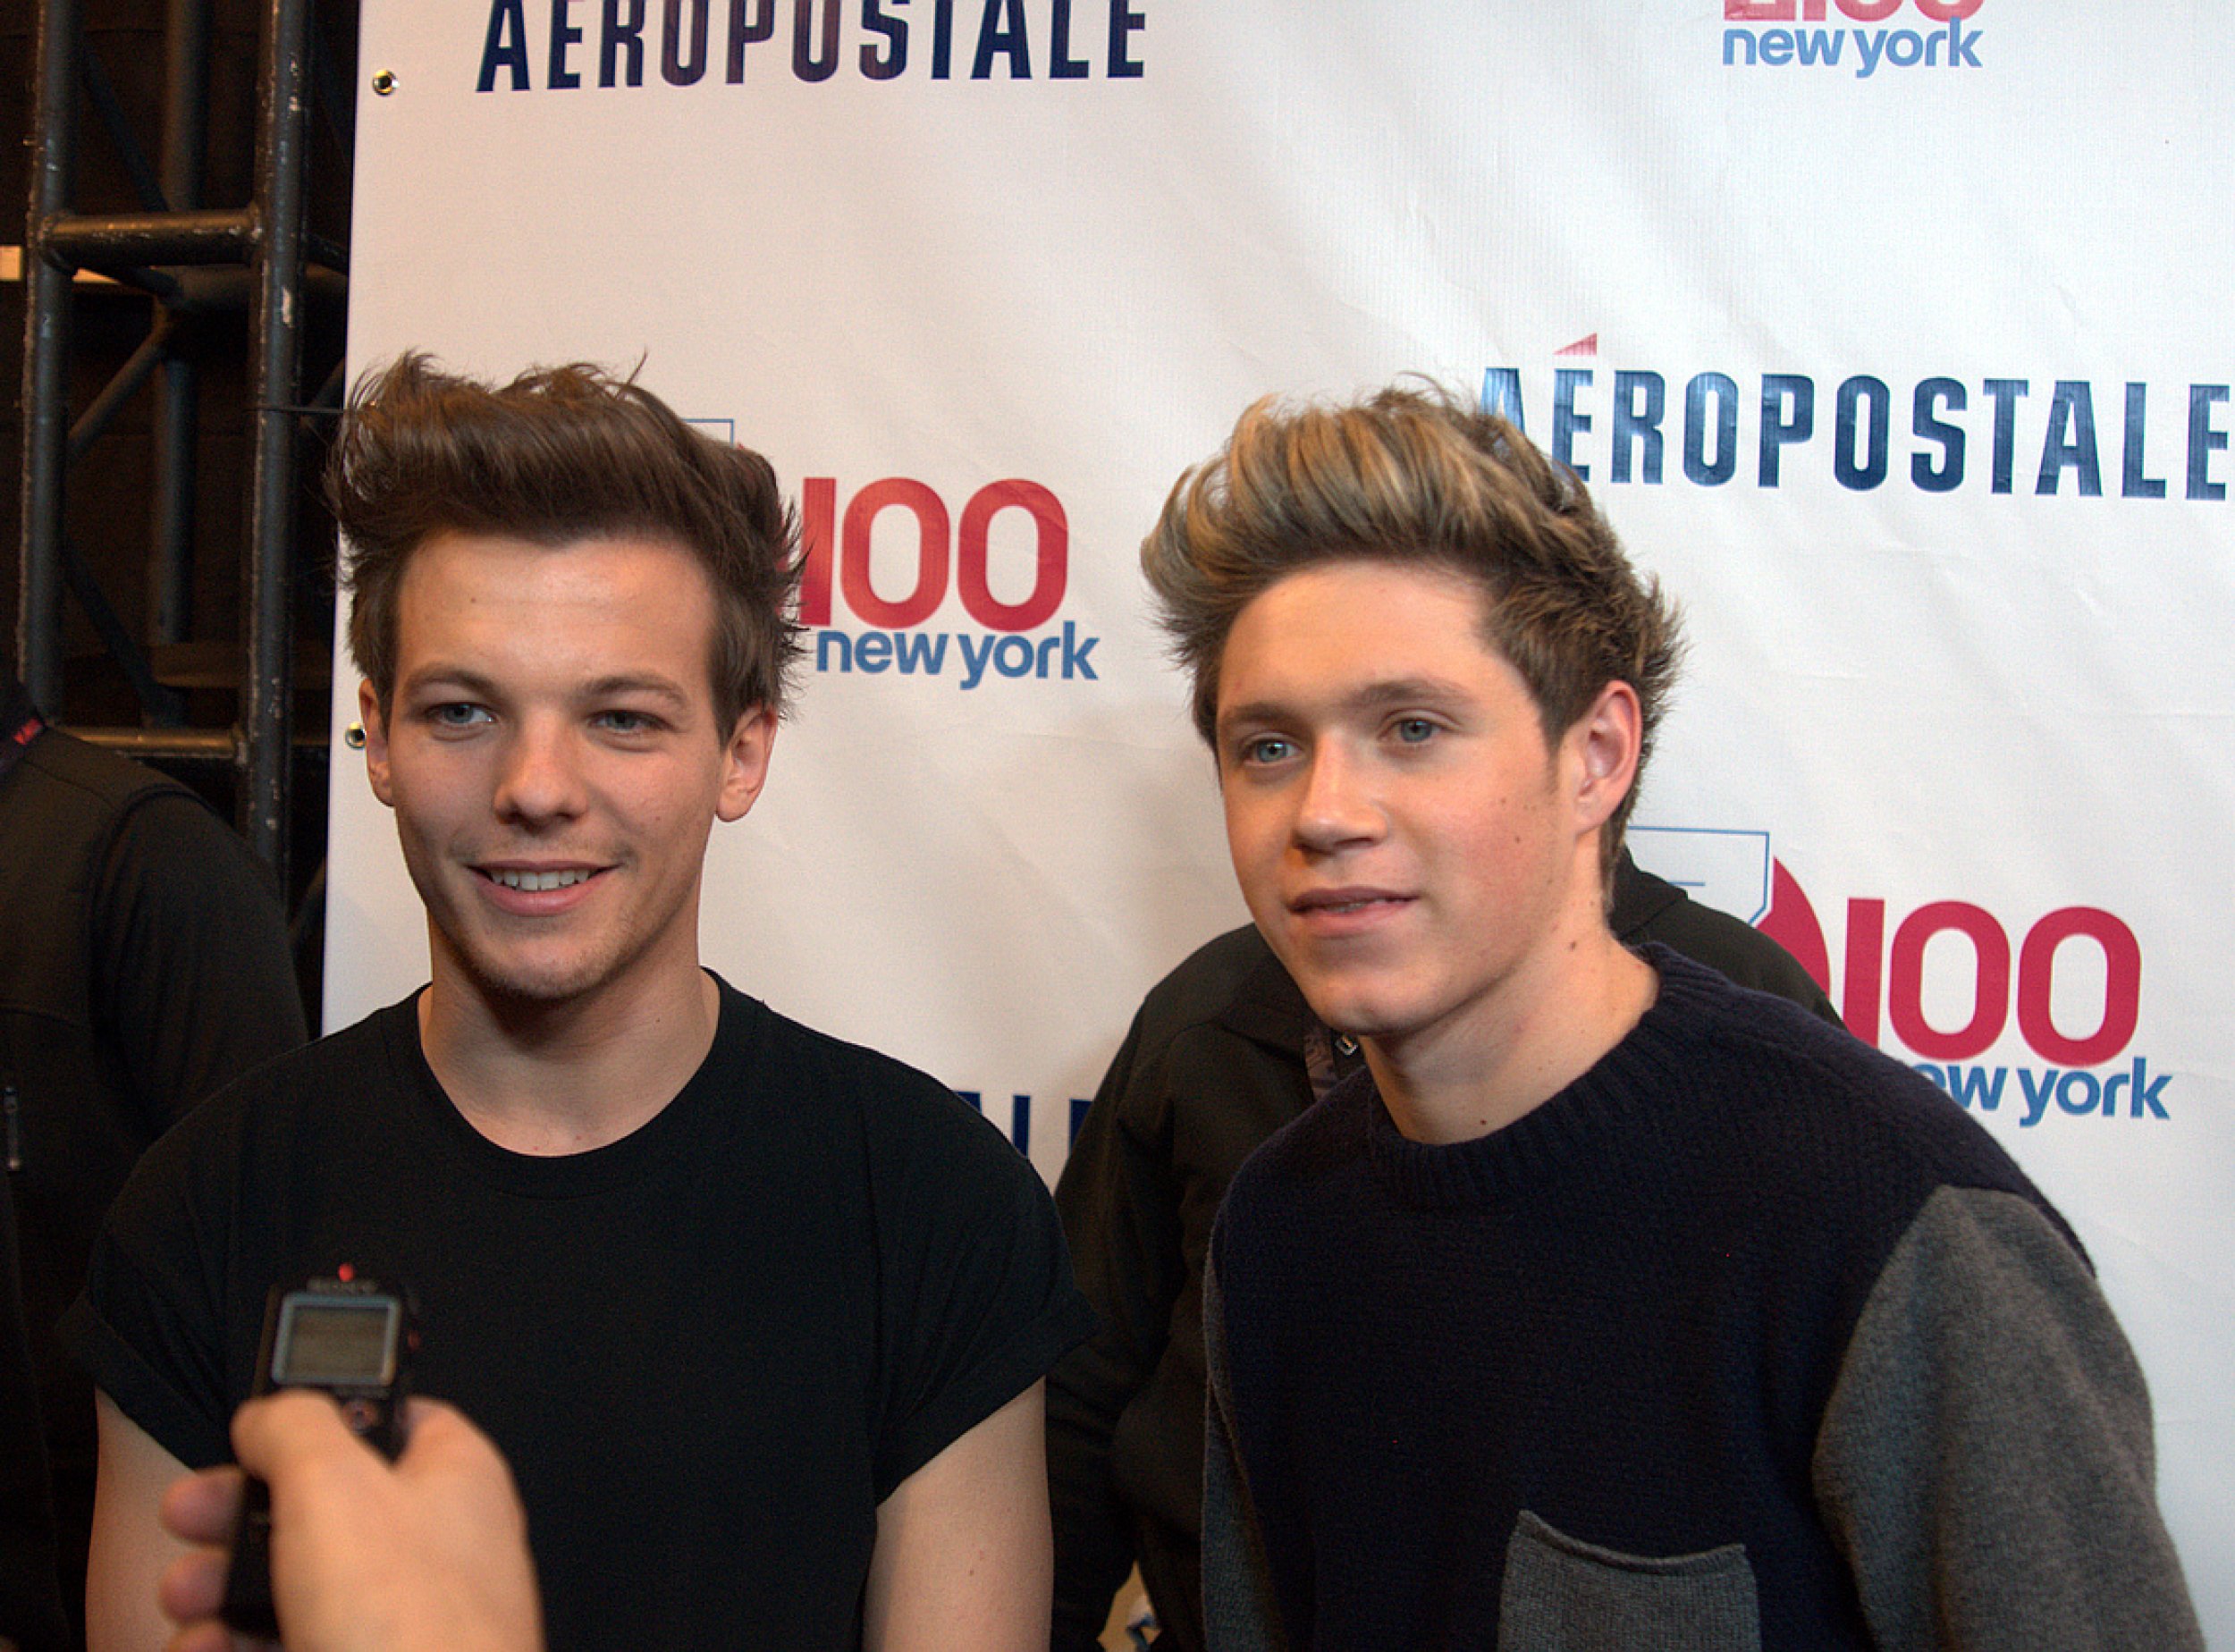 Louis Tomlinson and Niall Horan - One Direction